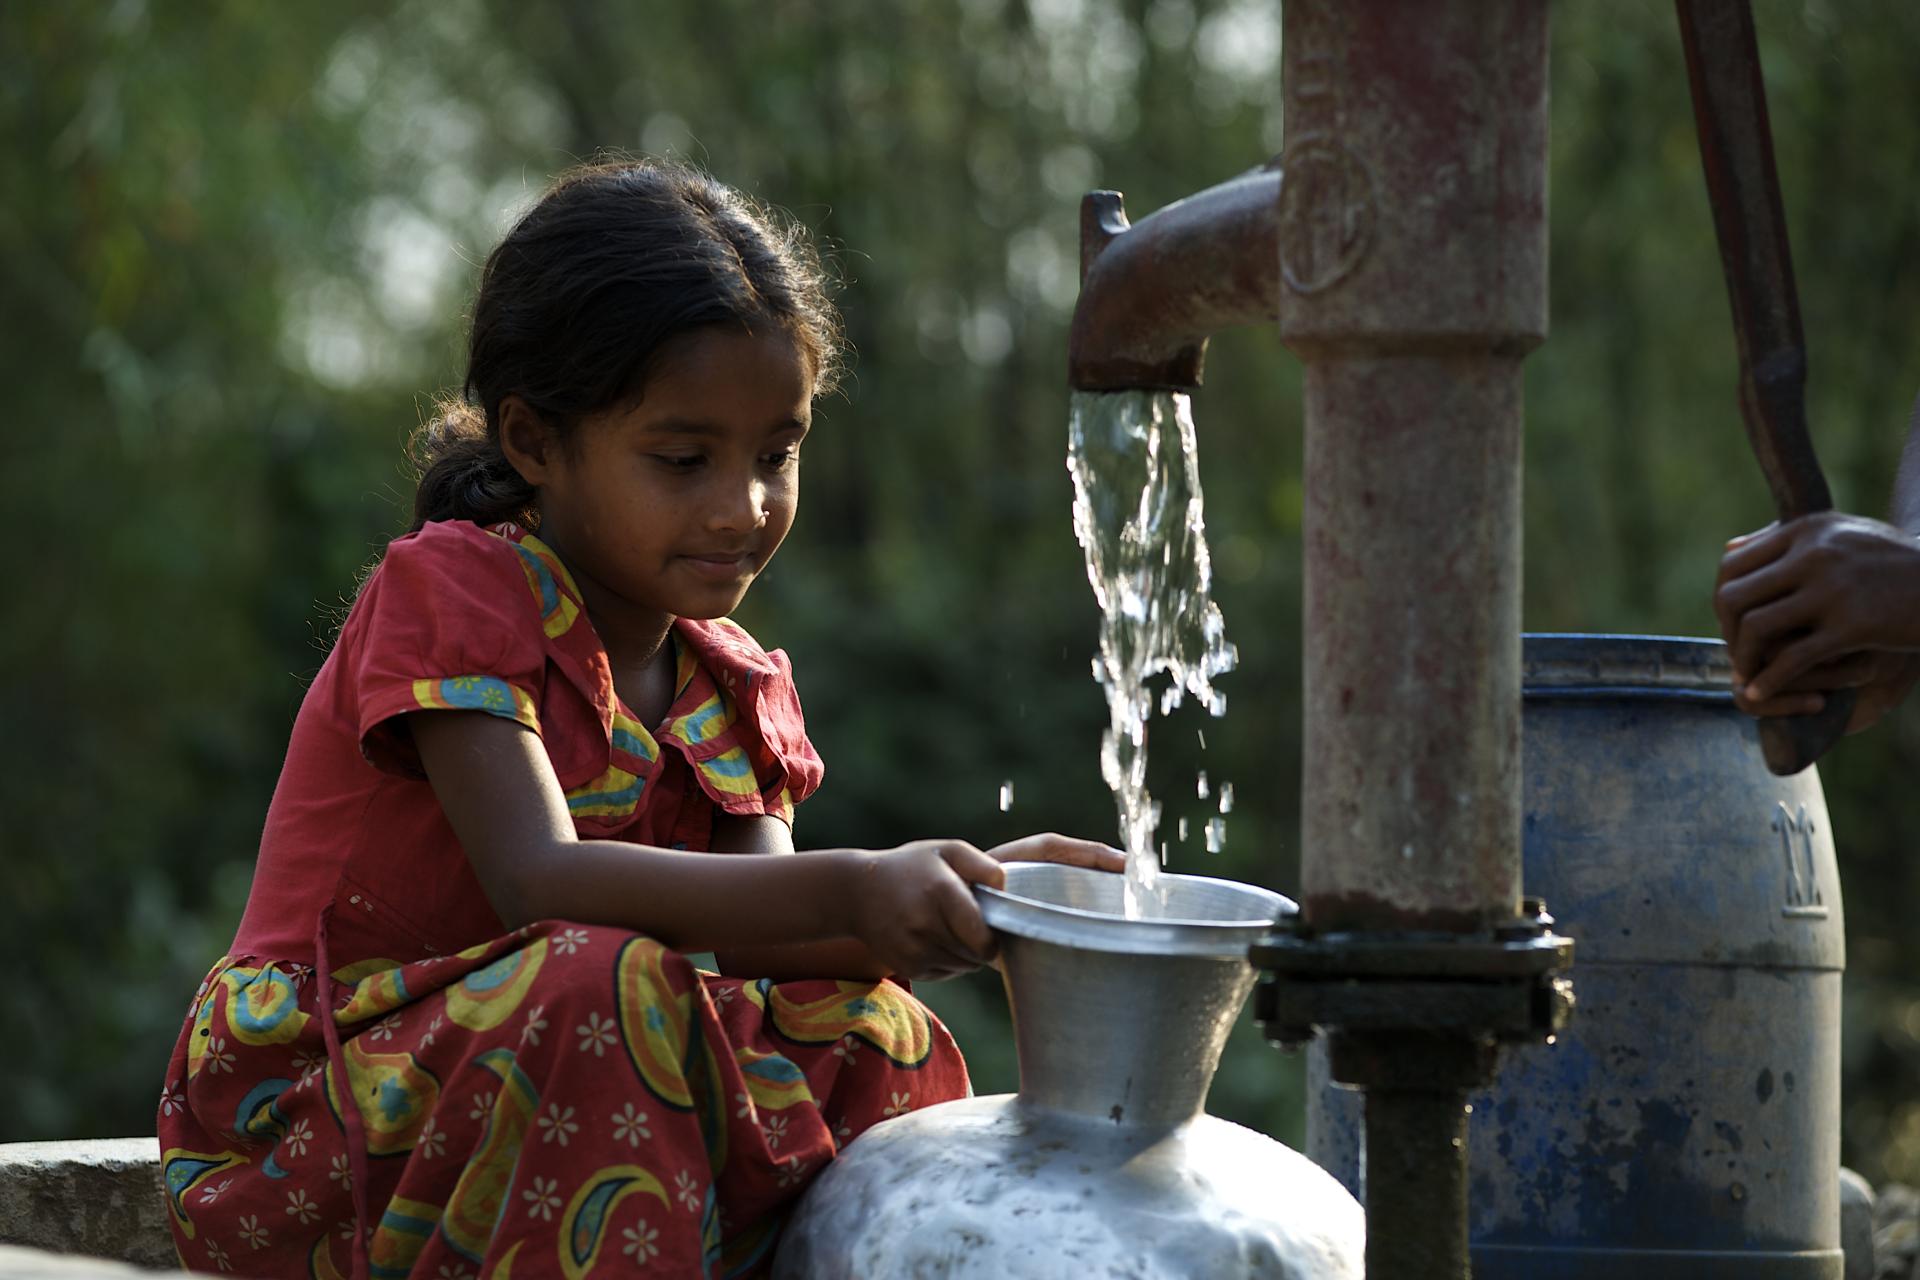 Better access to safe drinking water